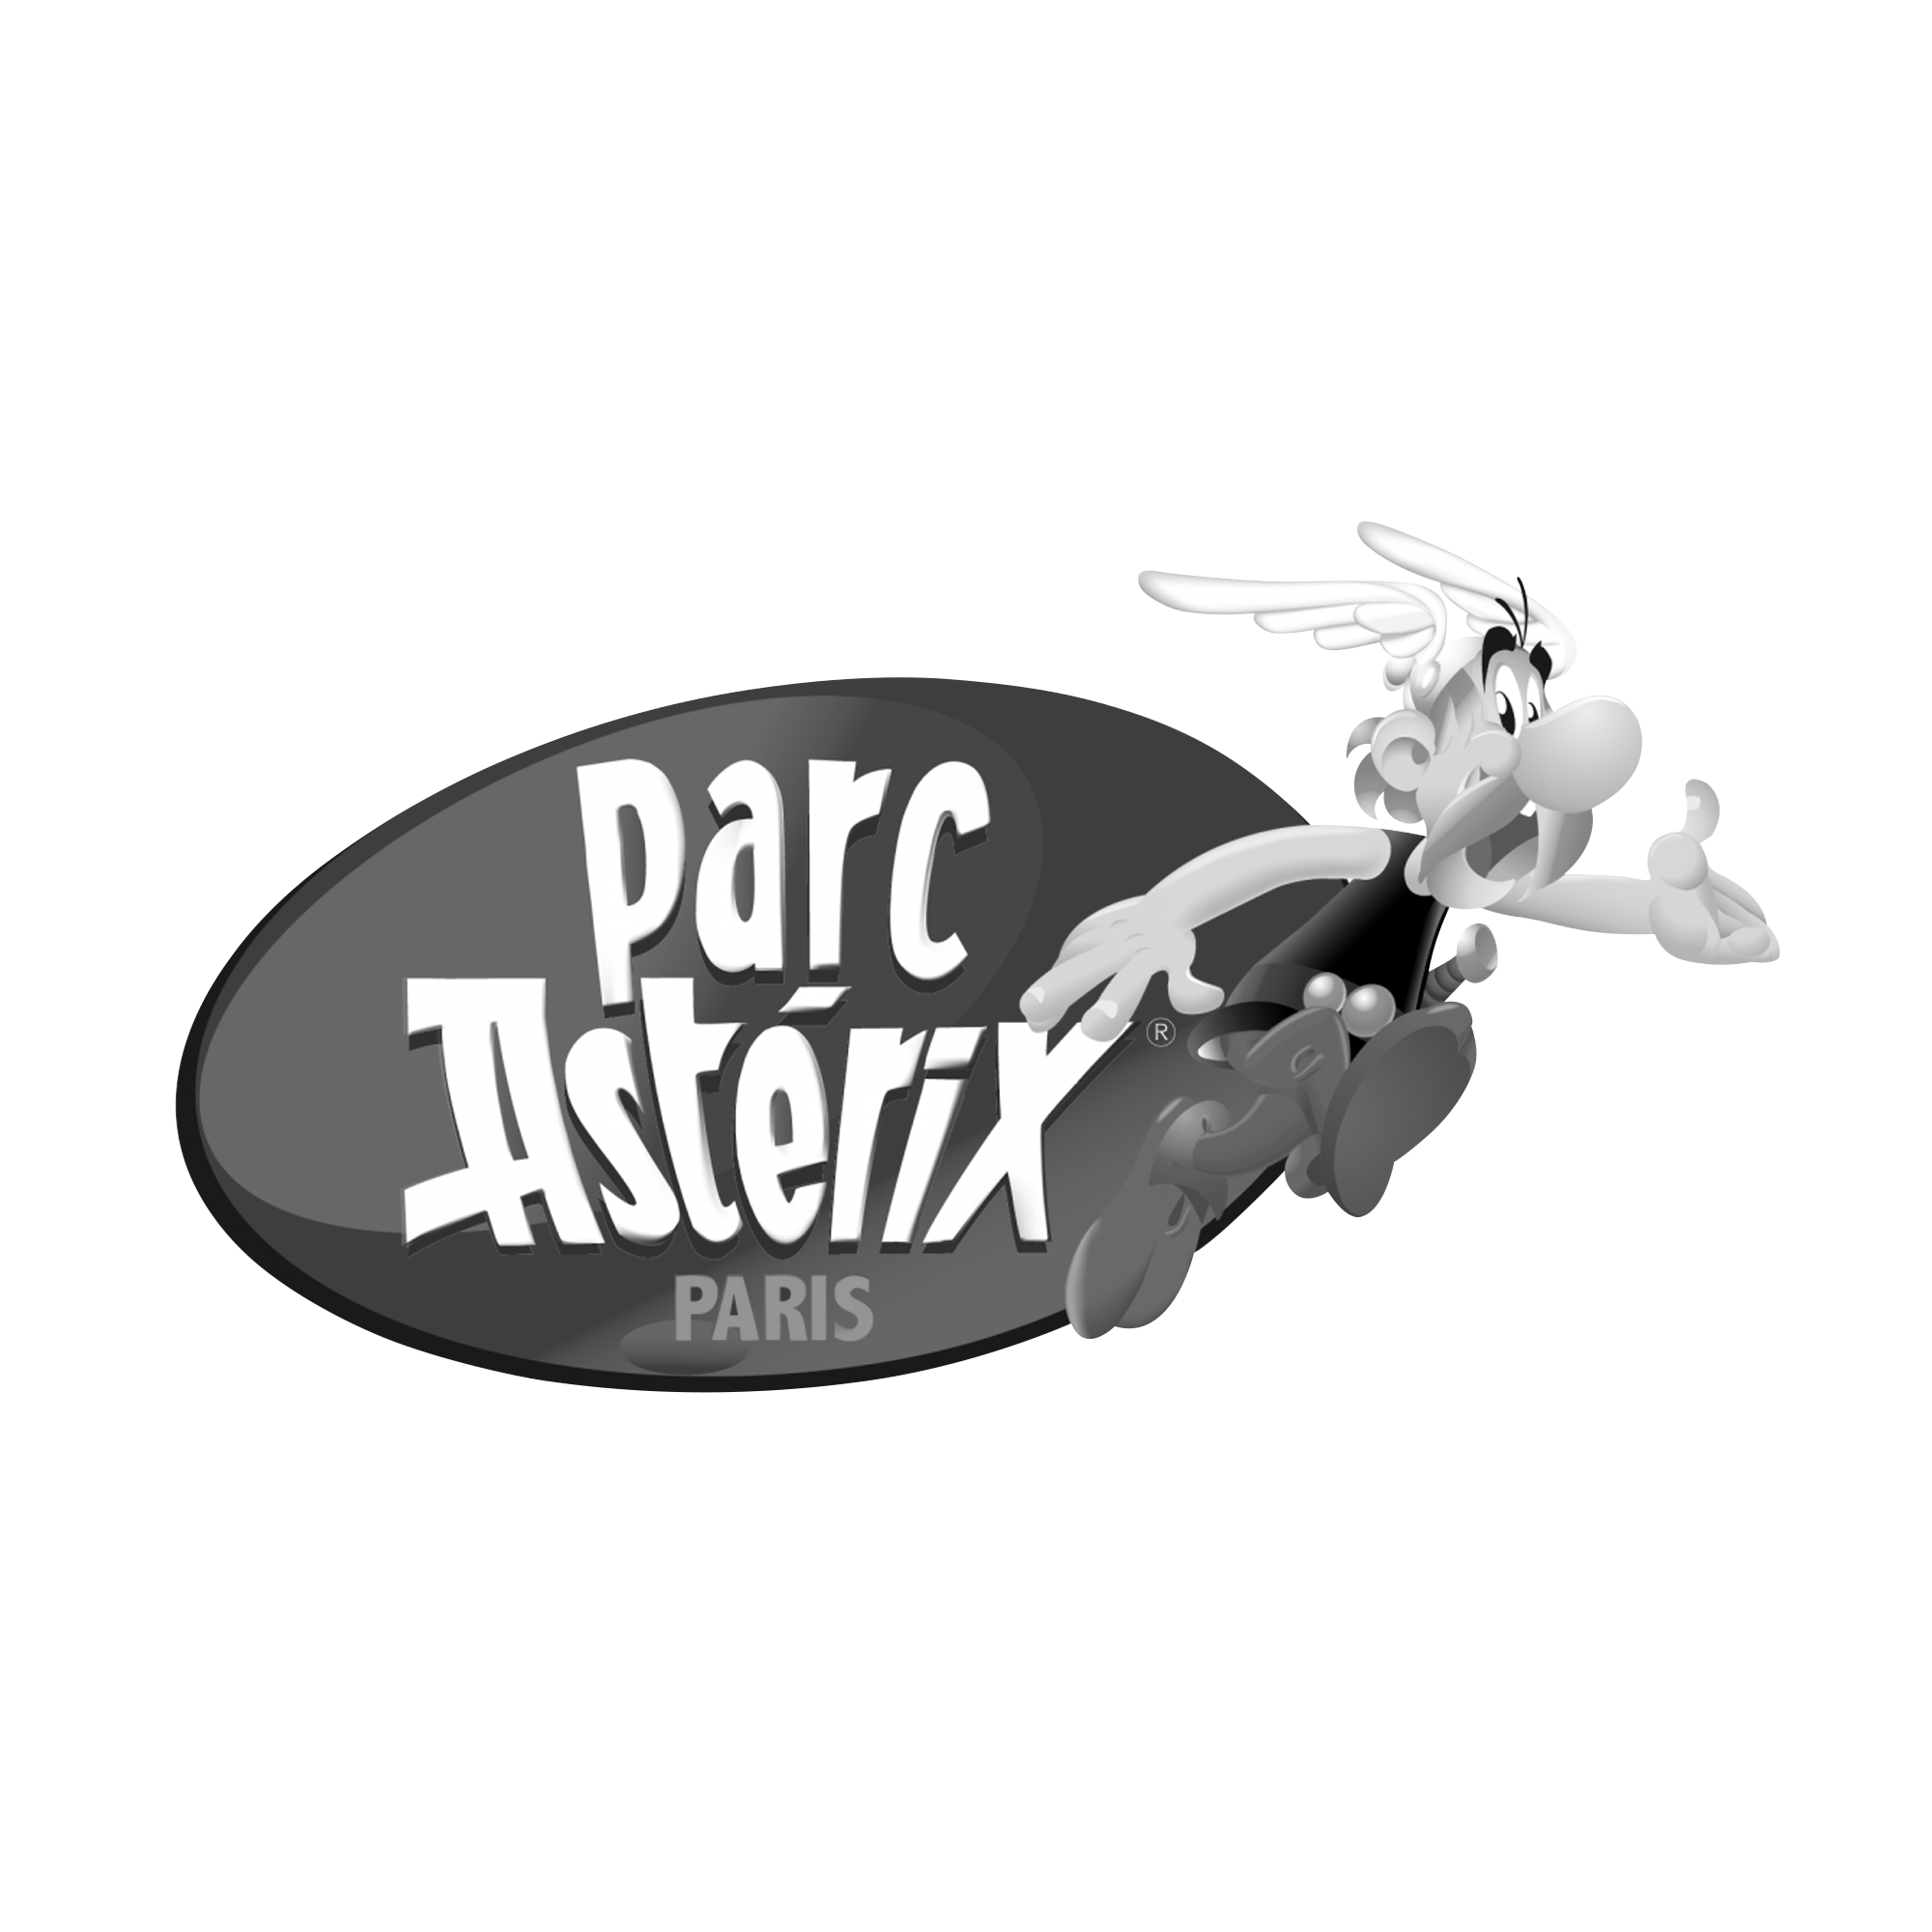 2000px-asterix.png